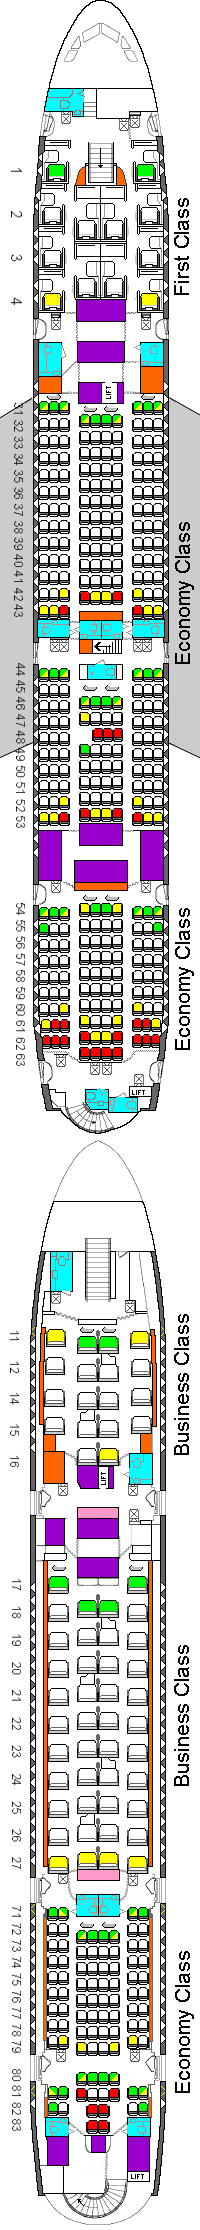 Singapore Airlines A380 seating plan